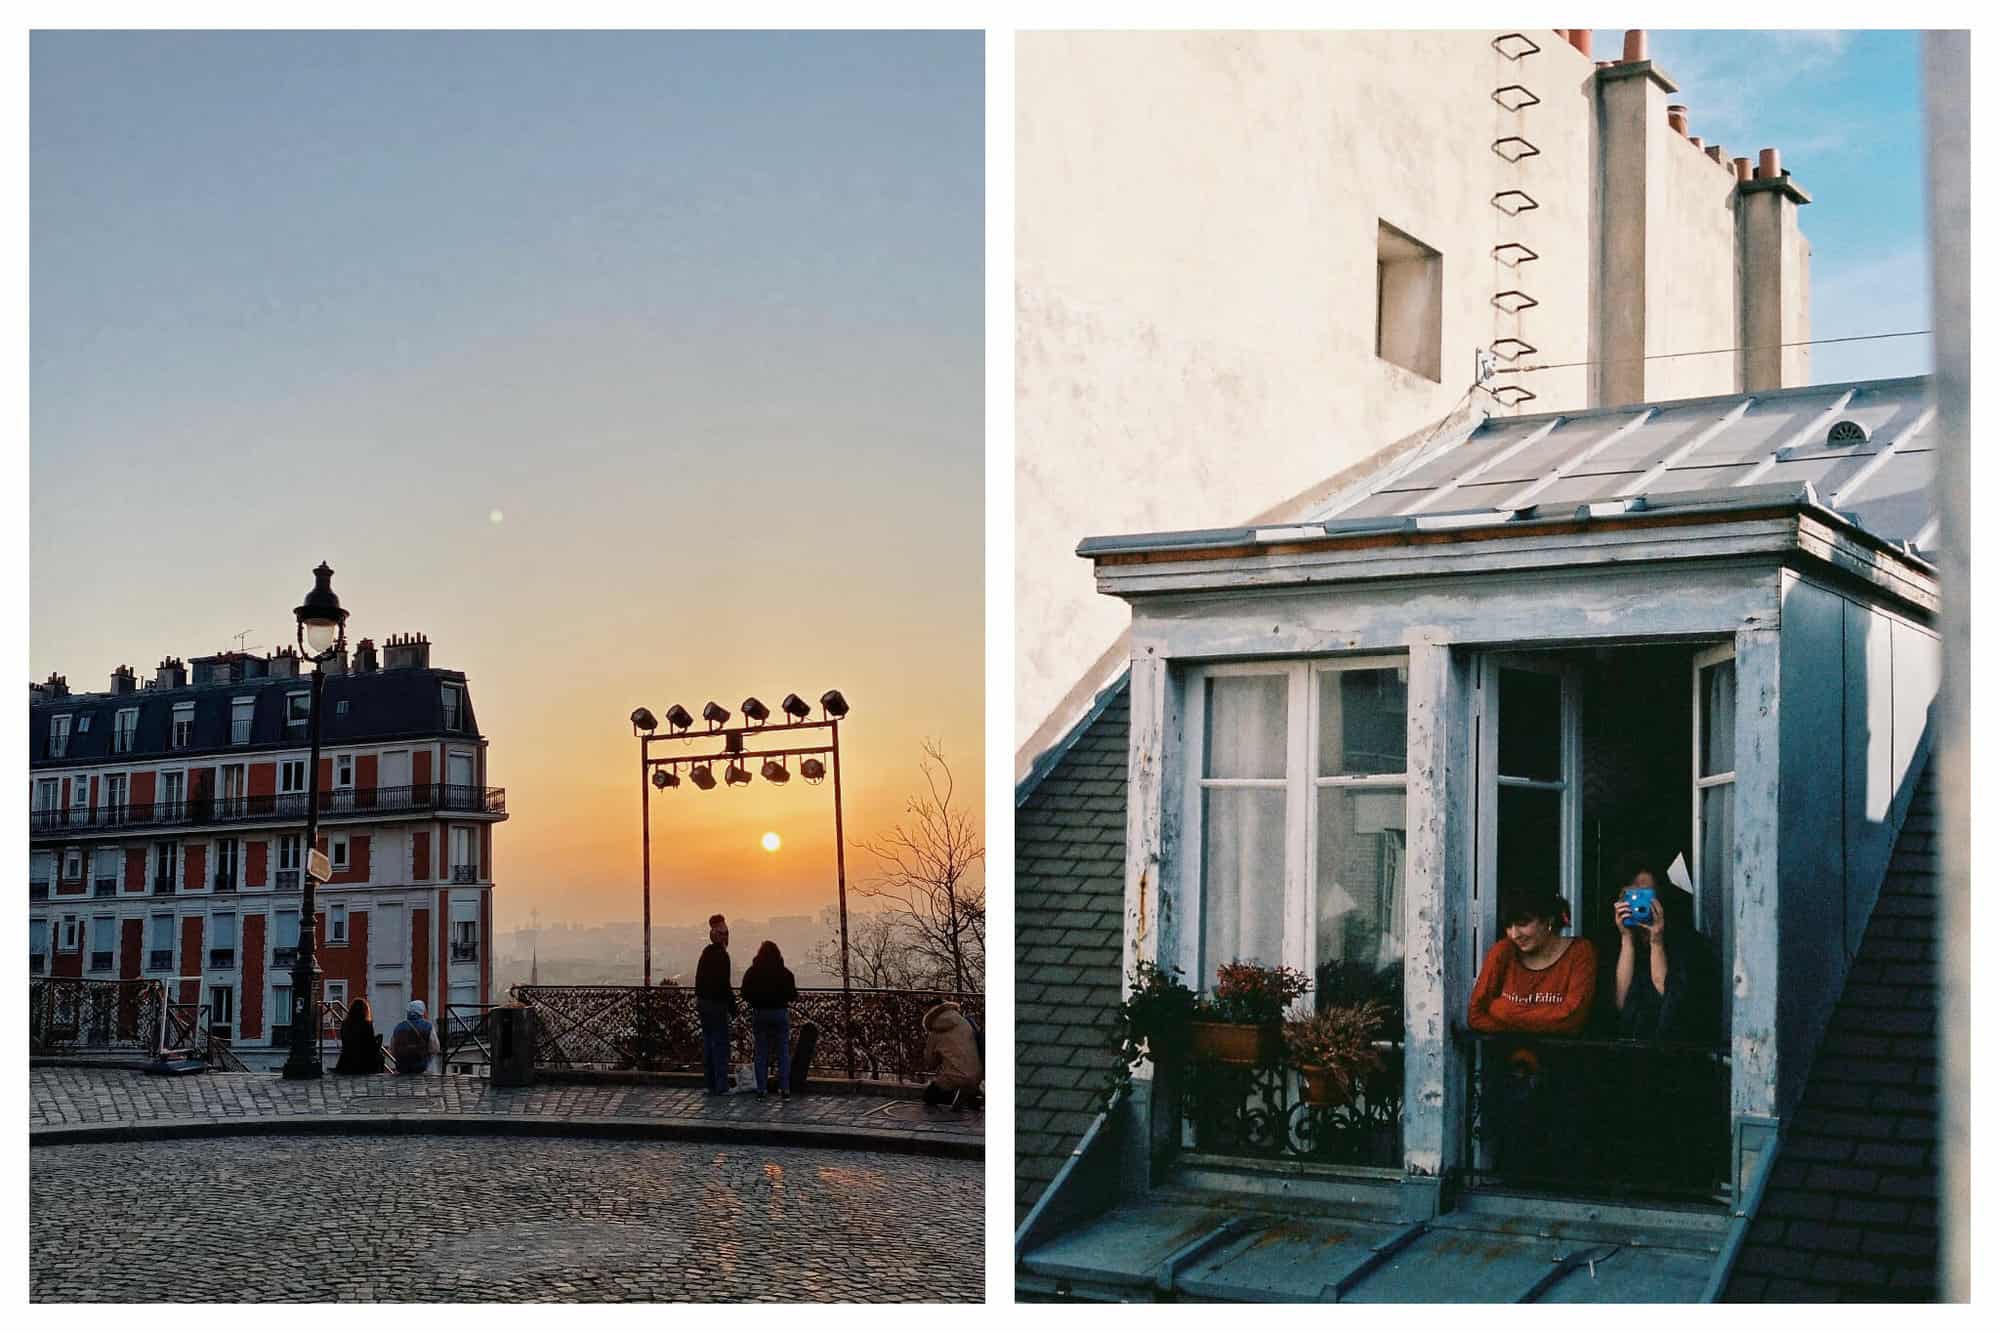 Left: The view from Sacre Coeur. The sun is setting, there are two people standing near a ledge with cobblestone roads and a building visible. Right: The photo is taken looking out of a window, photographing two people standing in an apartment across. One of the two people is taking a photo on a polaroid camera. 